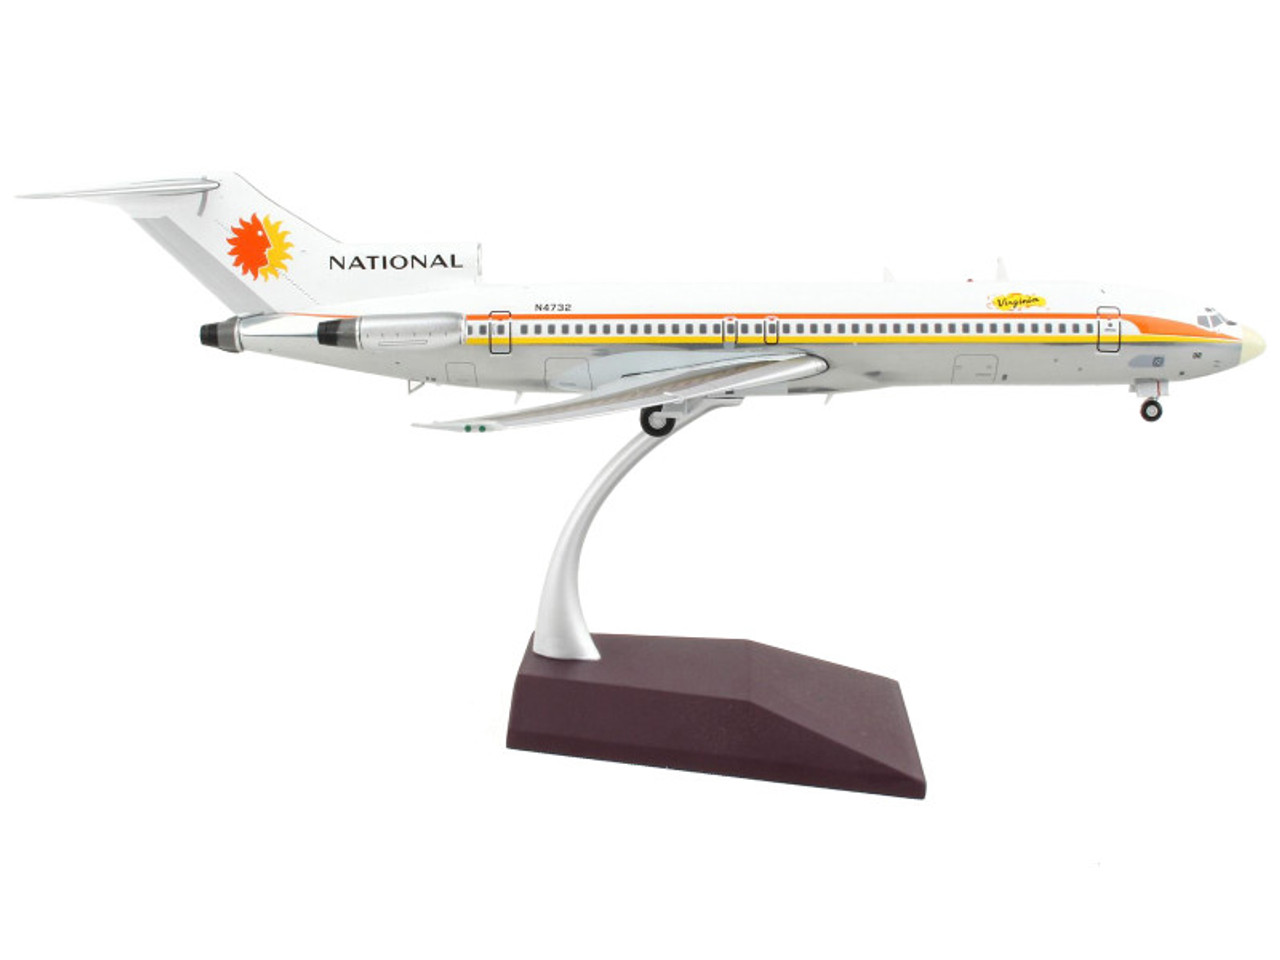 Boeing 727-200 Commercial Aircraft "National Airlines" White with Orange and Yellow Stripes "Gemini 200" Series 1/200 Diecast Model Airplane by GeminiJets